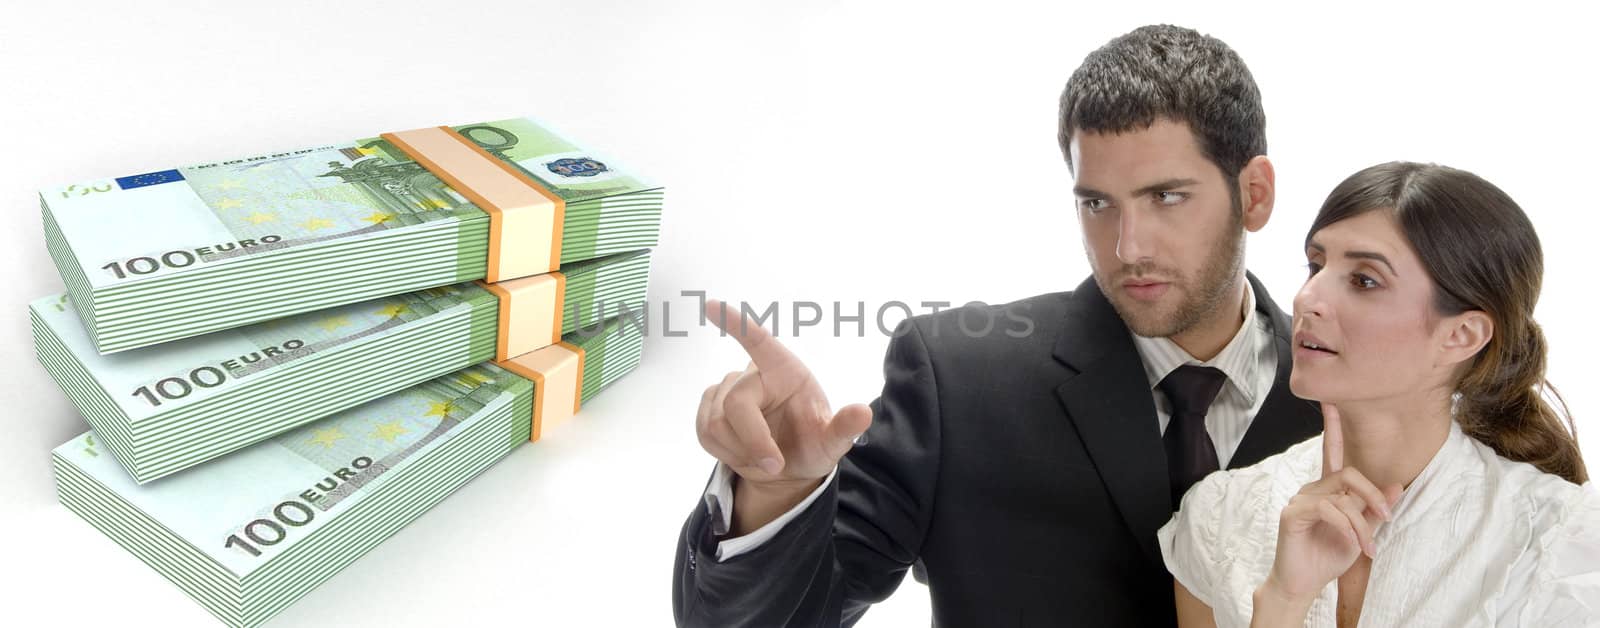 business team and  three dimensional bundles of europian currency on an isolated white background